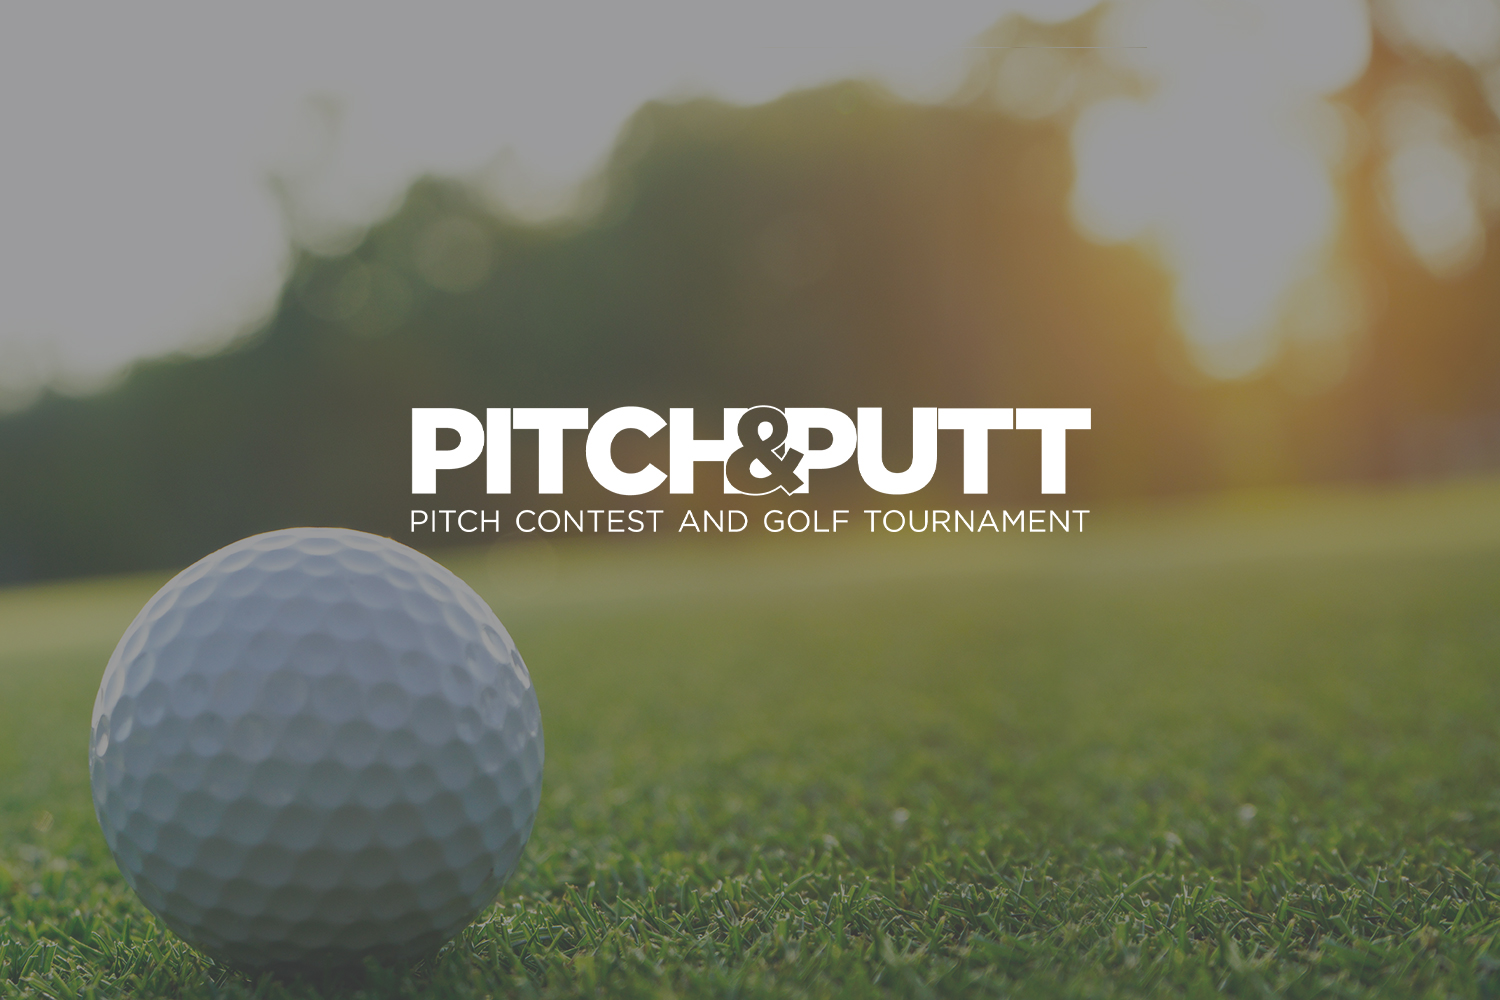 Pitch and Putt golf ball and text